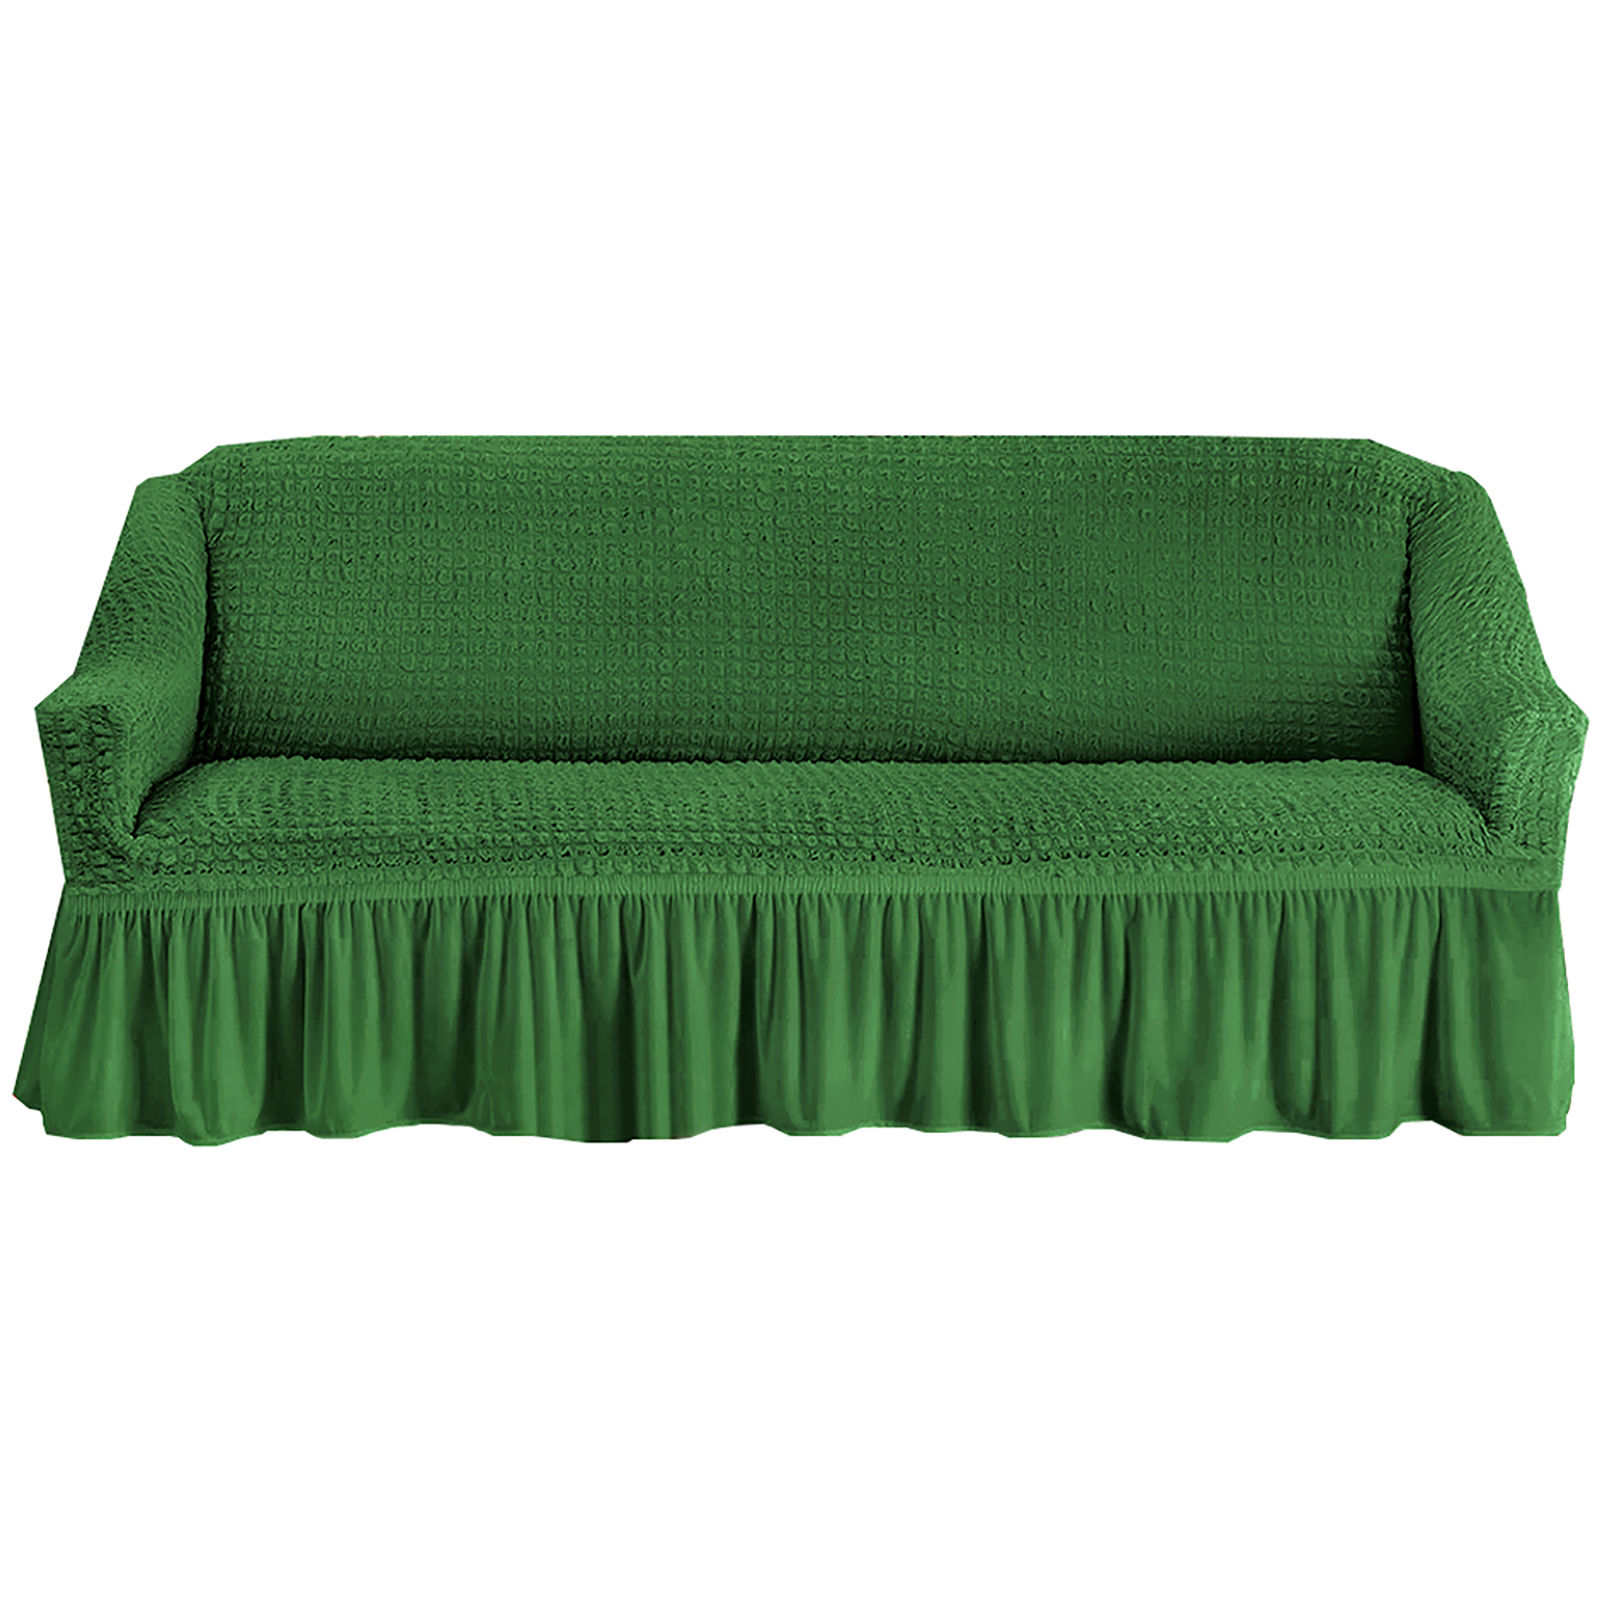 Stretch Sofa Slipcover, 3 Seater Sofa Slipcovers With Skirt With Armless Soft Sofa Cover Elastic Straps Sofa Slipcover For Living Room Kids Pets-Green A-Small